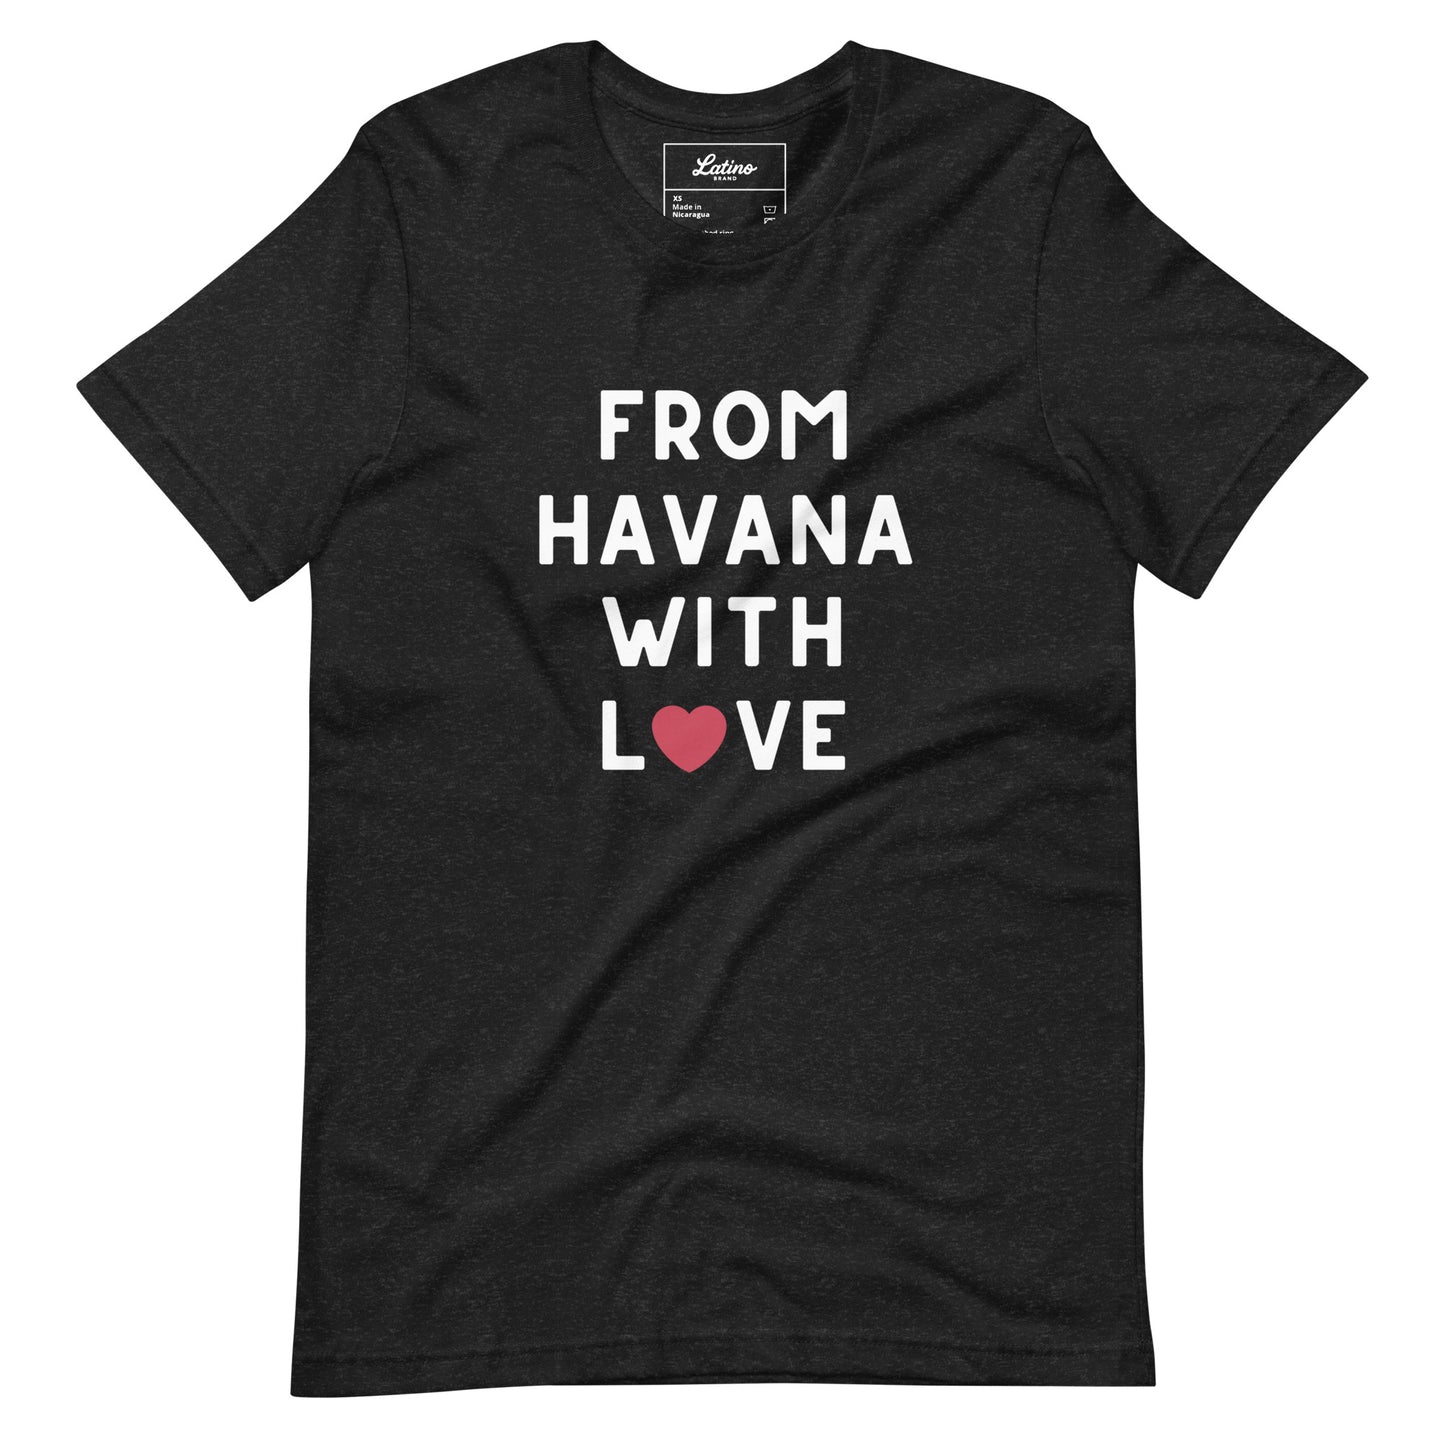 🇨🇺 From Havana With Love